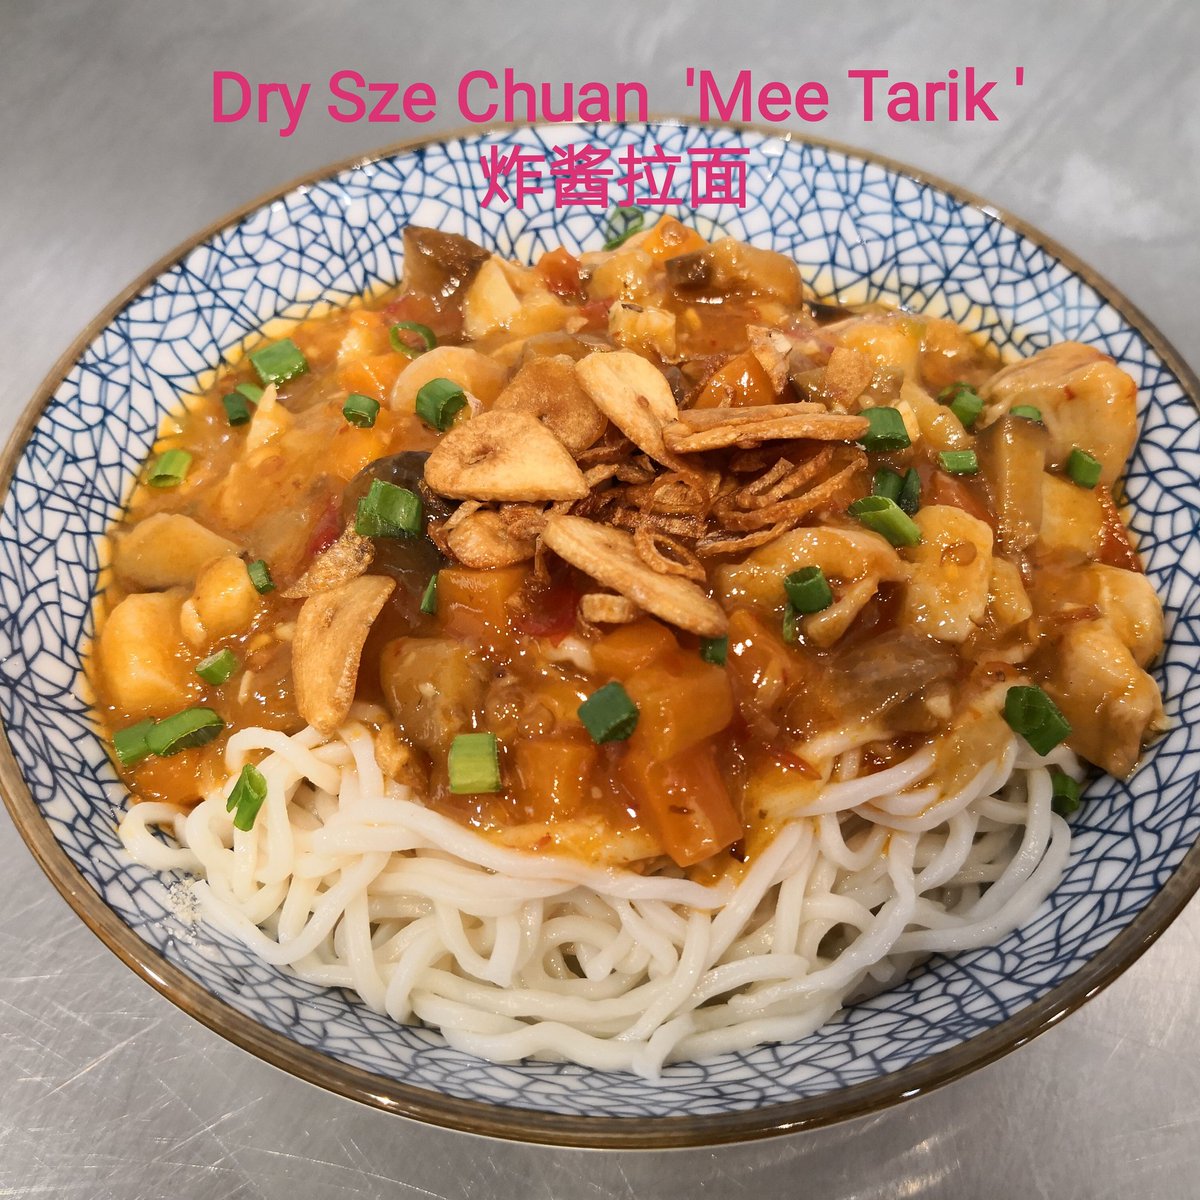 There are so many yummy Chinese noodles dishes, presenting in soups, fried noodles and noodle salad.
Try our Dry Sze Chuan Mee Tarik (炸酱拉面 ) today .
#mydimsum  #mydimsumsetapakcentral  #dimsum  #dimsums  #dimsumenak  #dimsumtime  #food  #foodies  #foodporn #meetarik